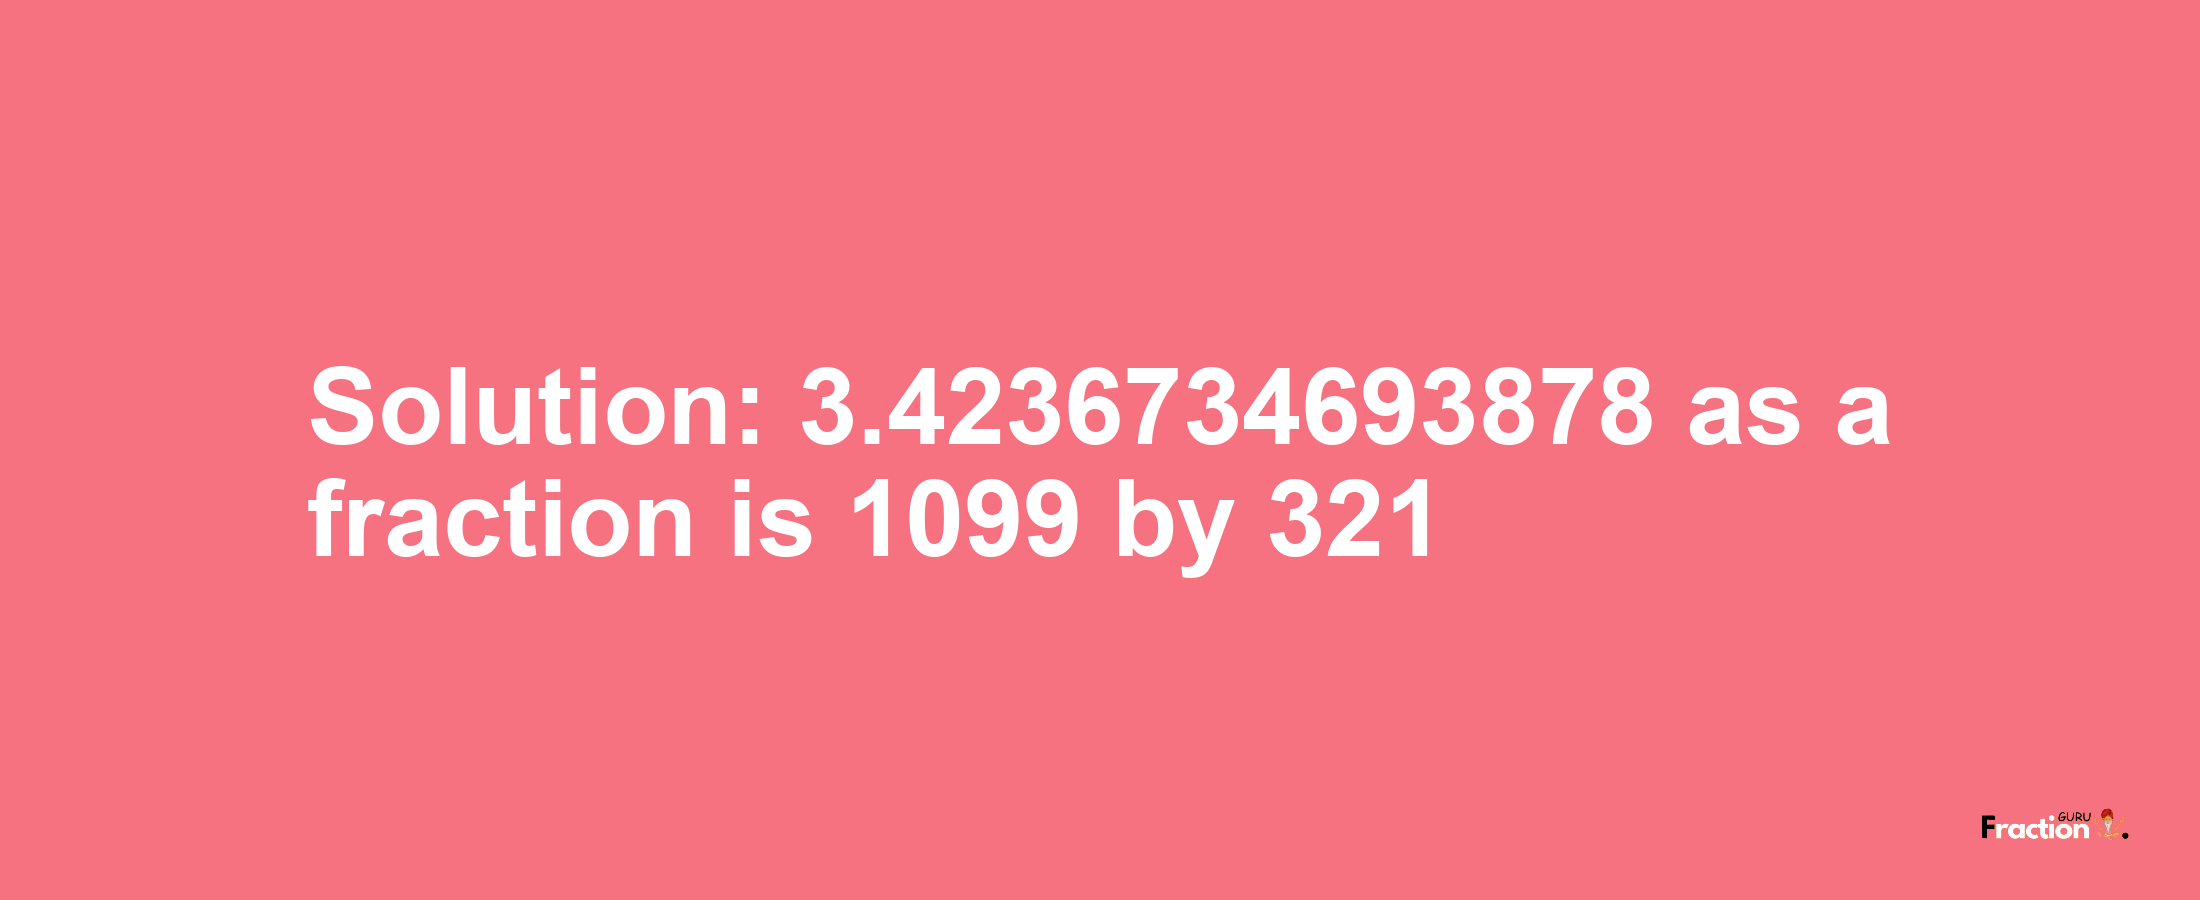 Solution:3.4236734693878 as a fraction is 1099/321